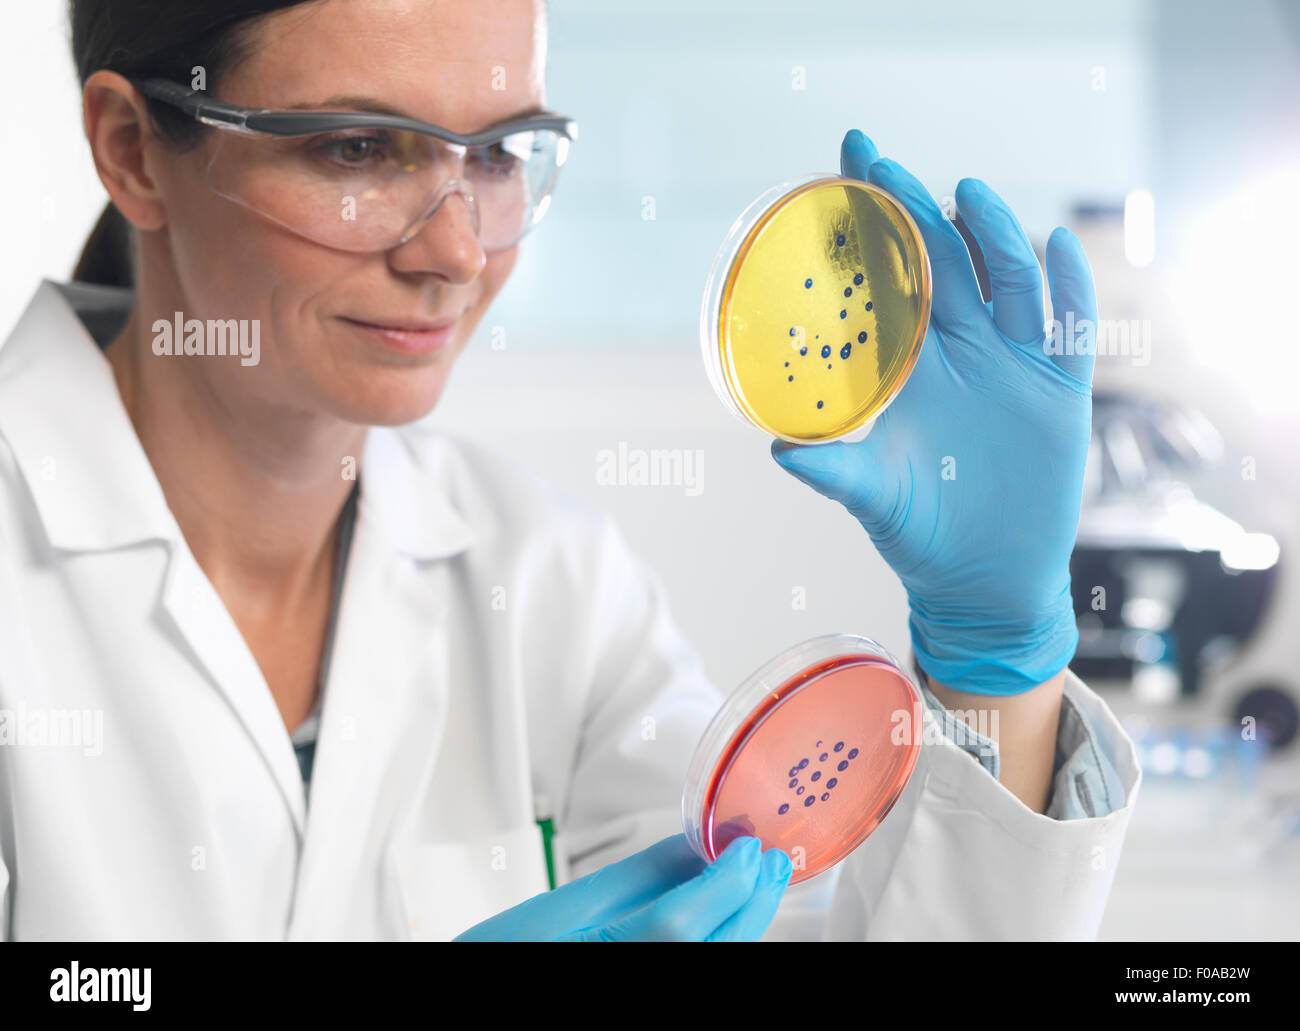 Scientist examining set of petri dishes in microbiology lab Stock Photo